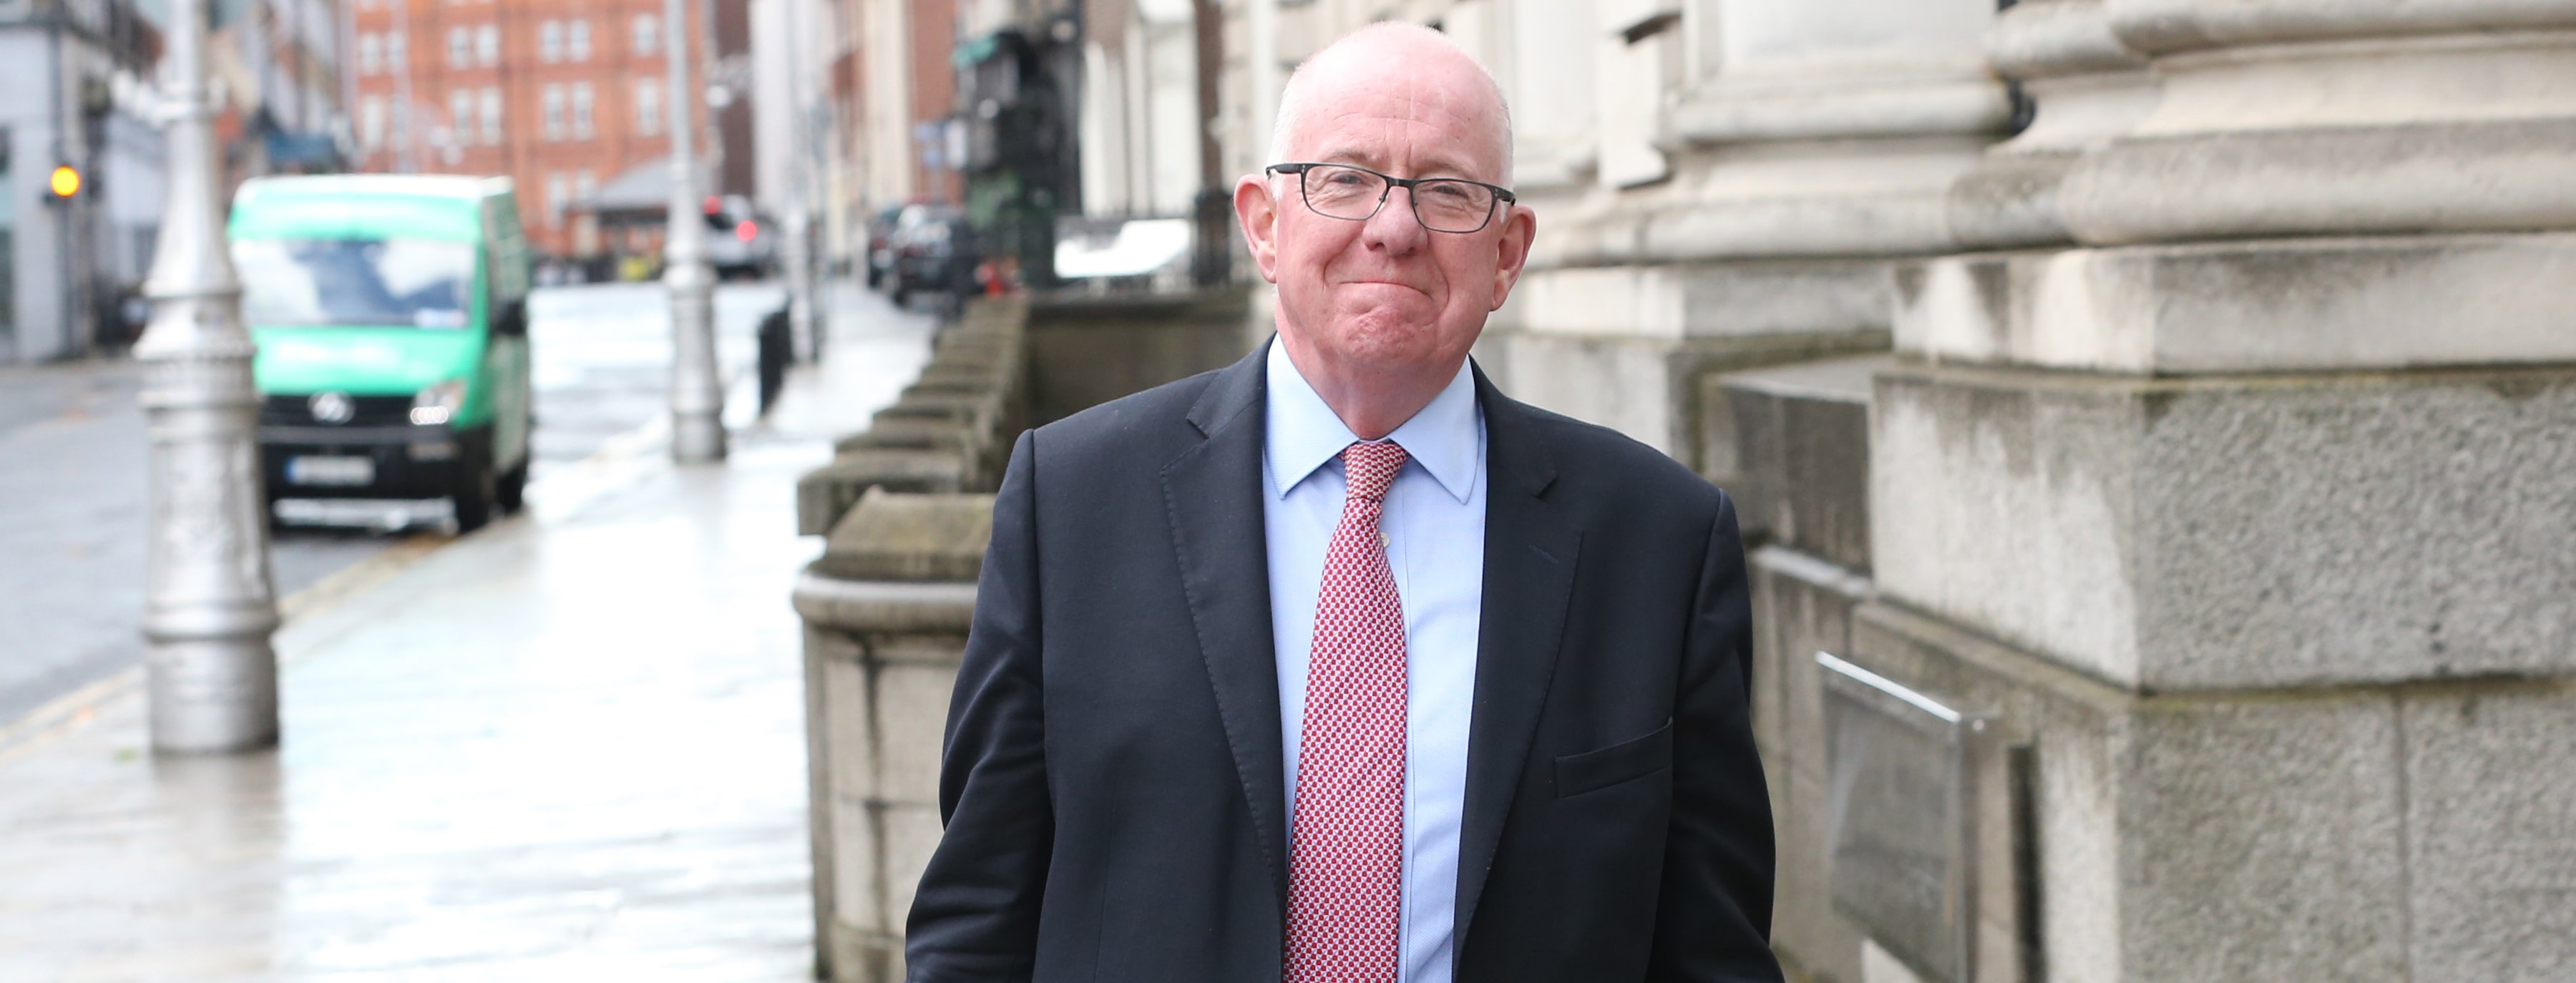 Garda powers will stay for now – Flanagan